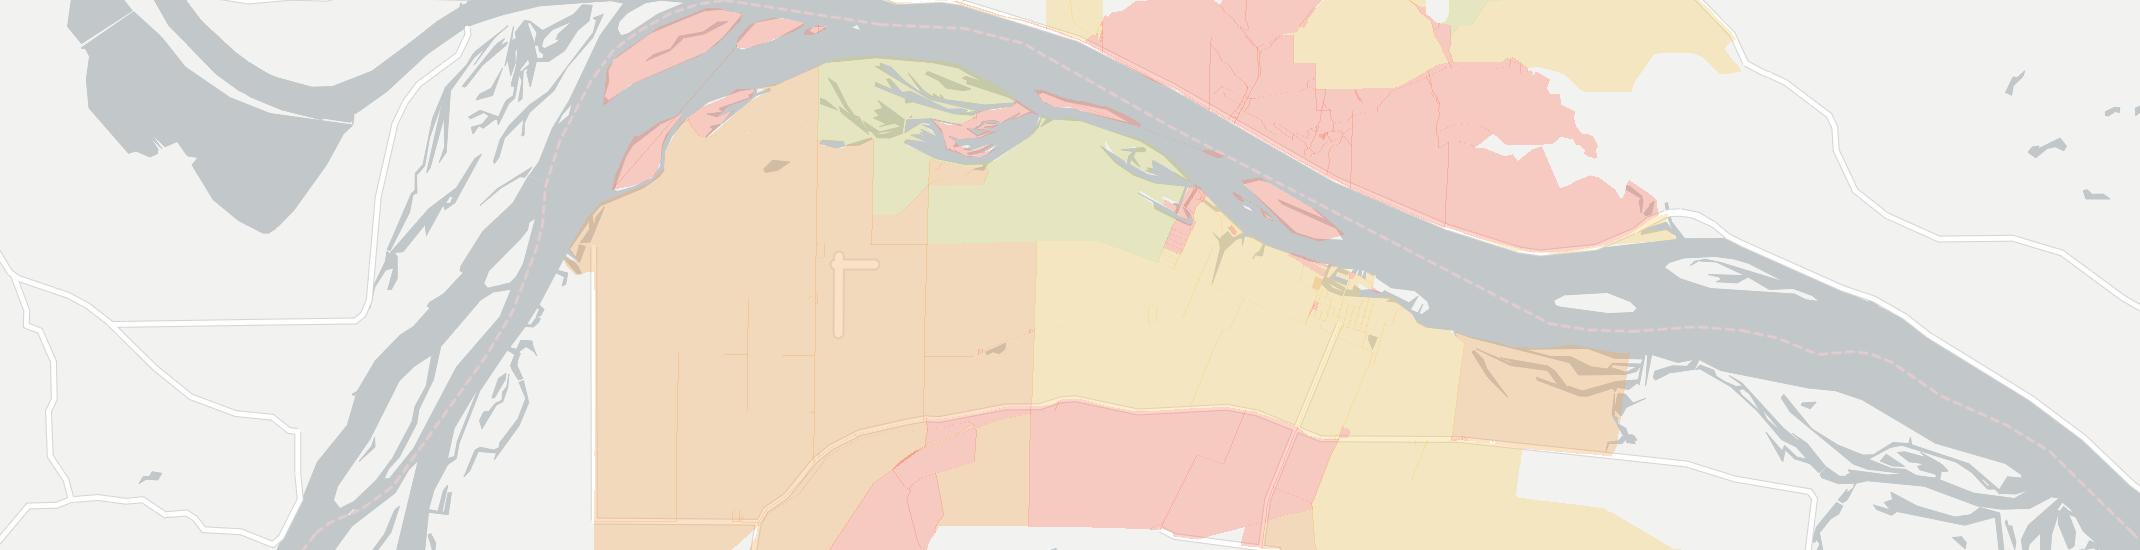 Portage Des Sioux Internet Competition Map. Click for interactive map.